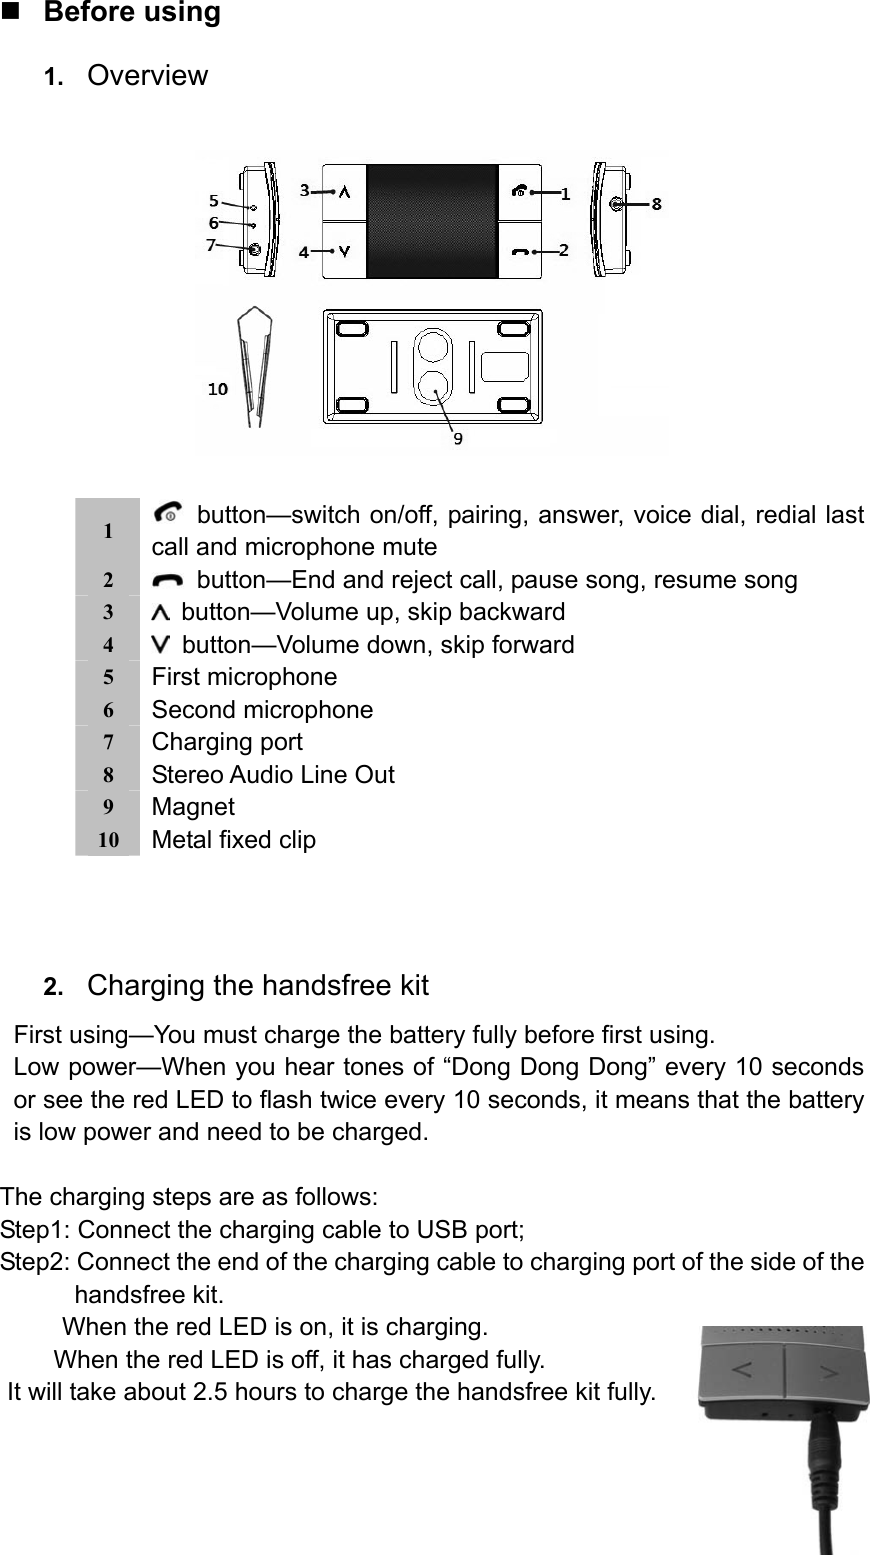  Before using 1.  Overview    1    button—switch on/off, pairing, answer, voice dial, redial last call and microphone mute 2    button—End and reject call, pause song, resume song 3    button—Volume up, skip backward 4    button—Volume down, skip forward 5  First microphone 6  Second microphone 7  Charging port 8  Stereo Audio Line Out 9  Magnet 10  Metal fixed clip        2.  Charging the handsfree kit First using—You must charge the battery fully before first using. Low power—When you hear tones of “Dong Dong Dong” every 10 seconds or see the red LED to flash twice every 10 seconds, it means that the battery is low power and need to be charged.  The charging steps are as follows: Step1: Connect the charging cable to USB port; Step2: Connect the end of the charging cable to charging port of the side of the handsfree kit. When the red LED is on, it is charging.     When the red LED is off, it has charged fully. It will take about 2.5 hours to charge the handsfree kit fully. 